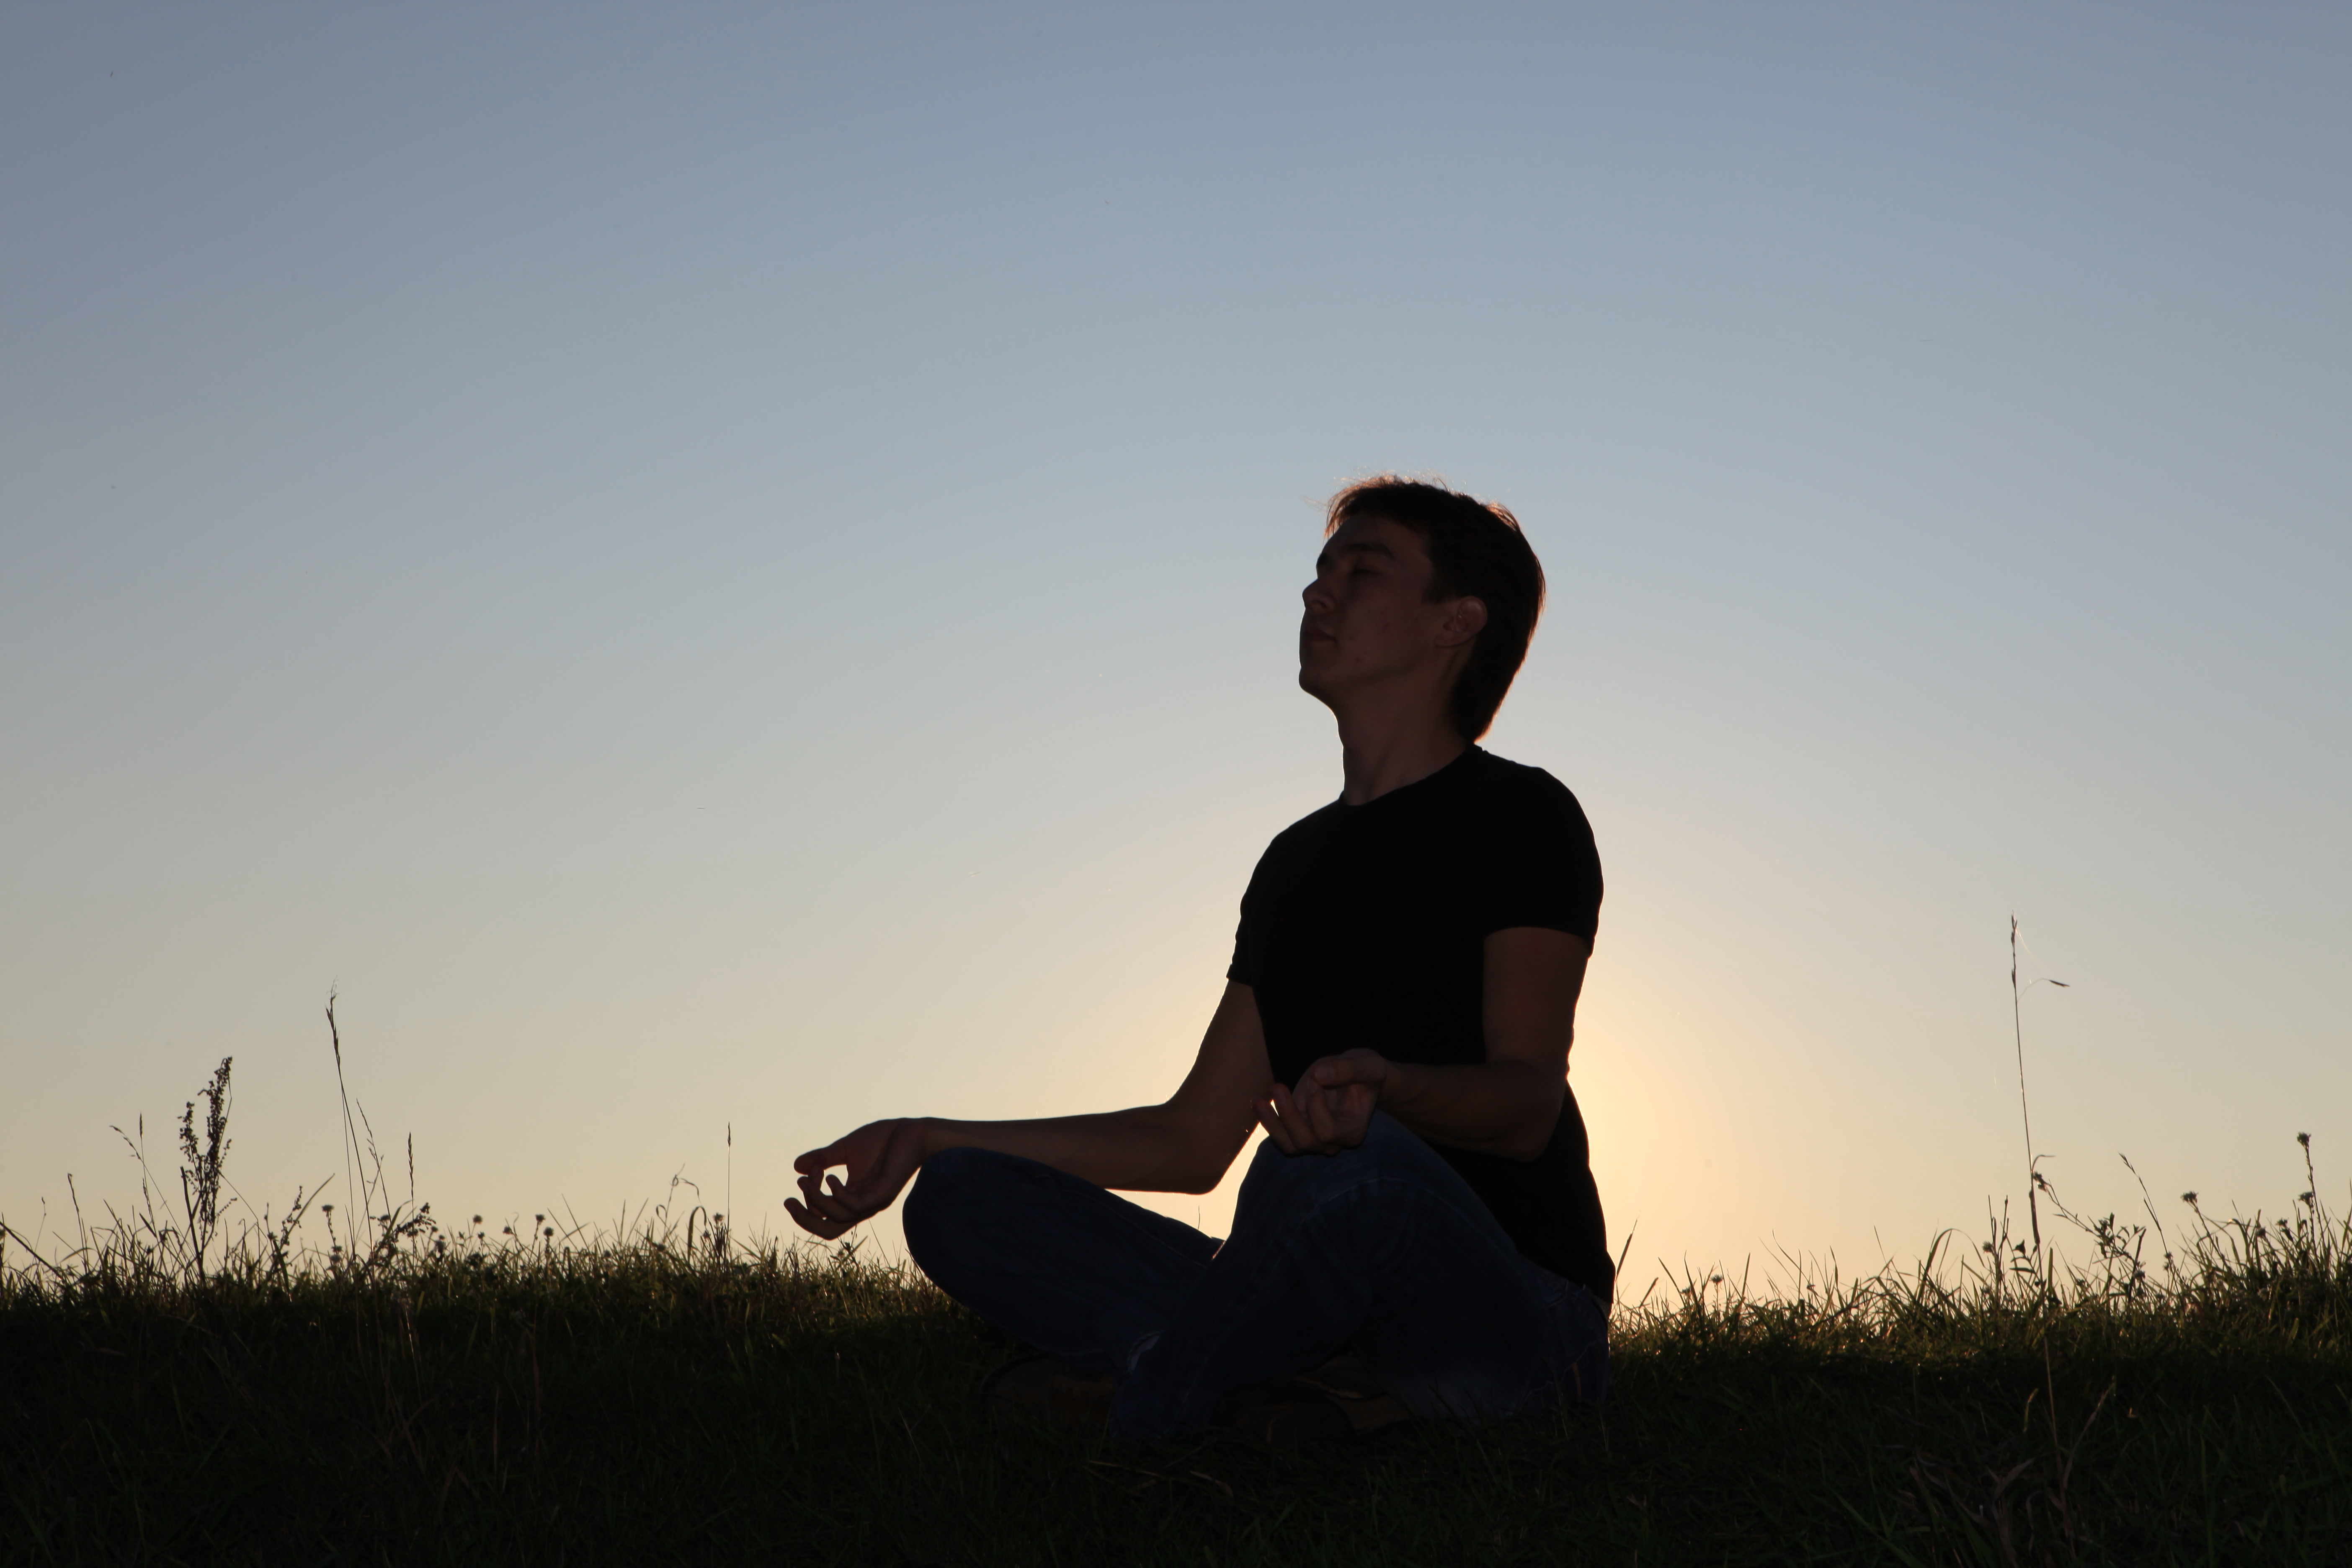 man in lotus pose, Summer, Practicing, Relax, Relaxation, HQ Photo